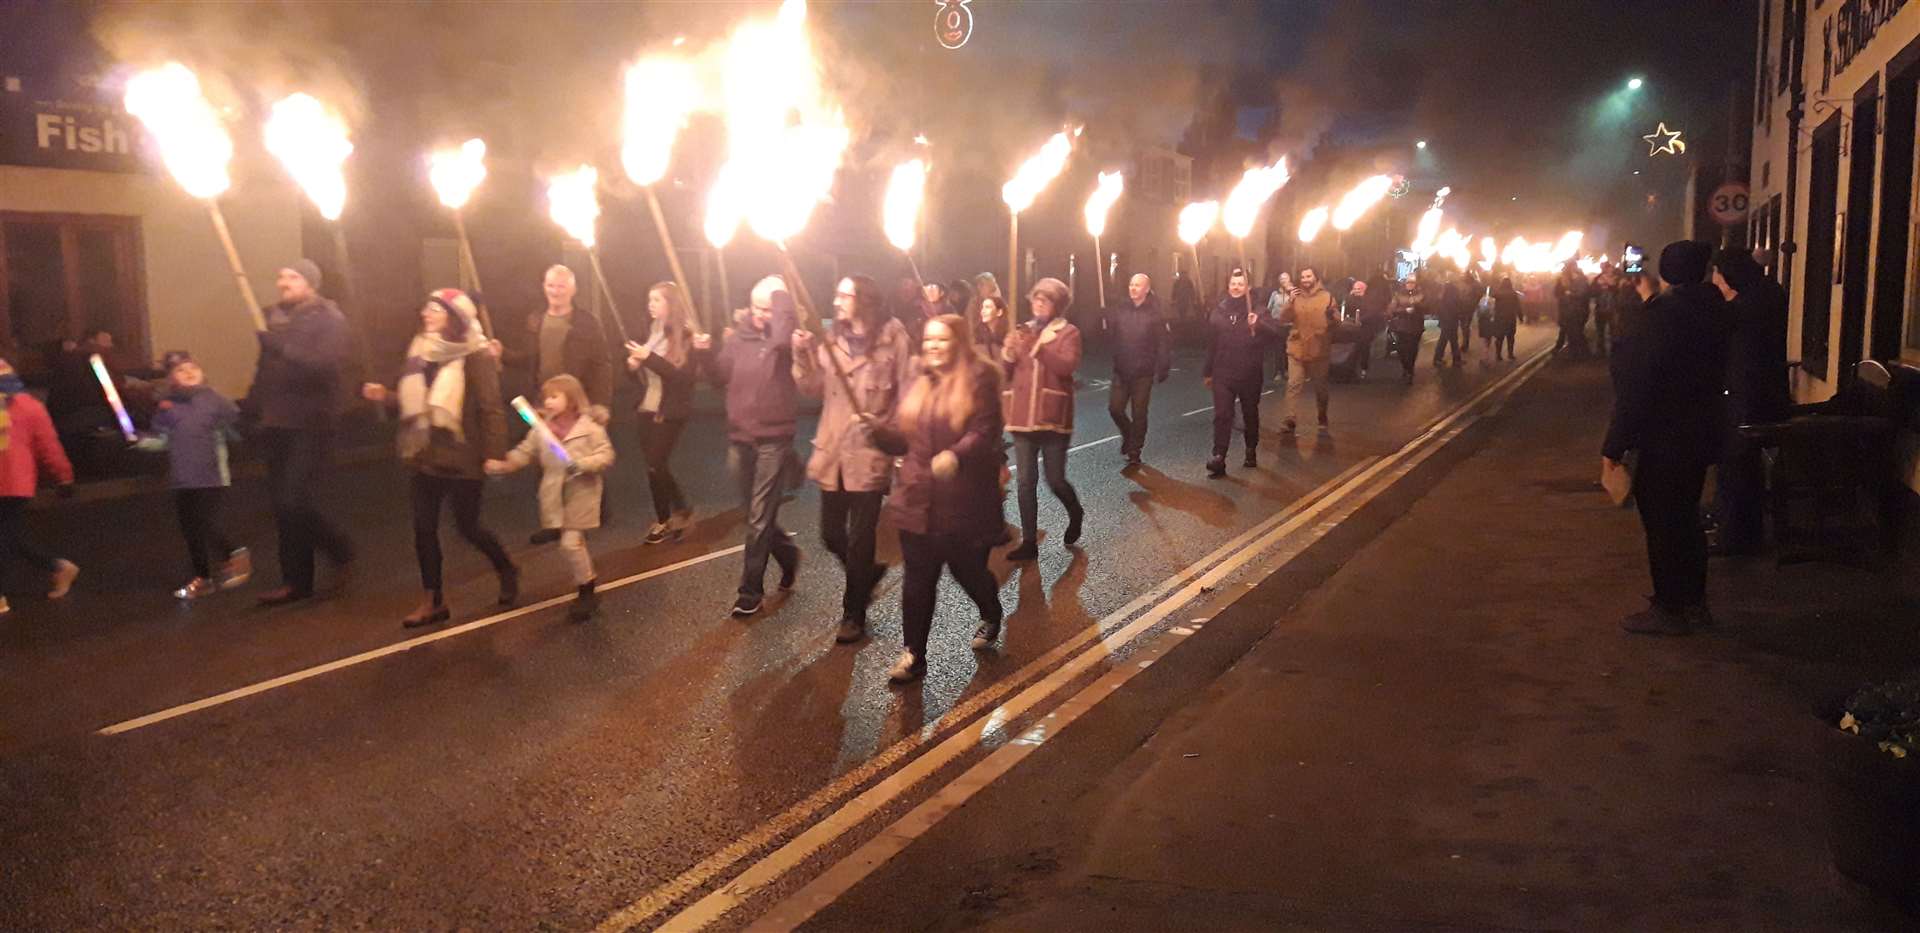 A torchlight procession took place at Golspie.